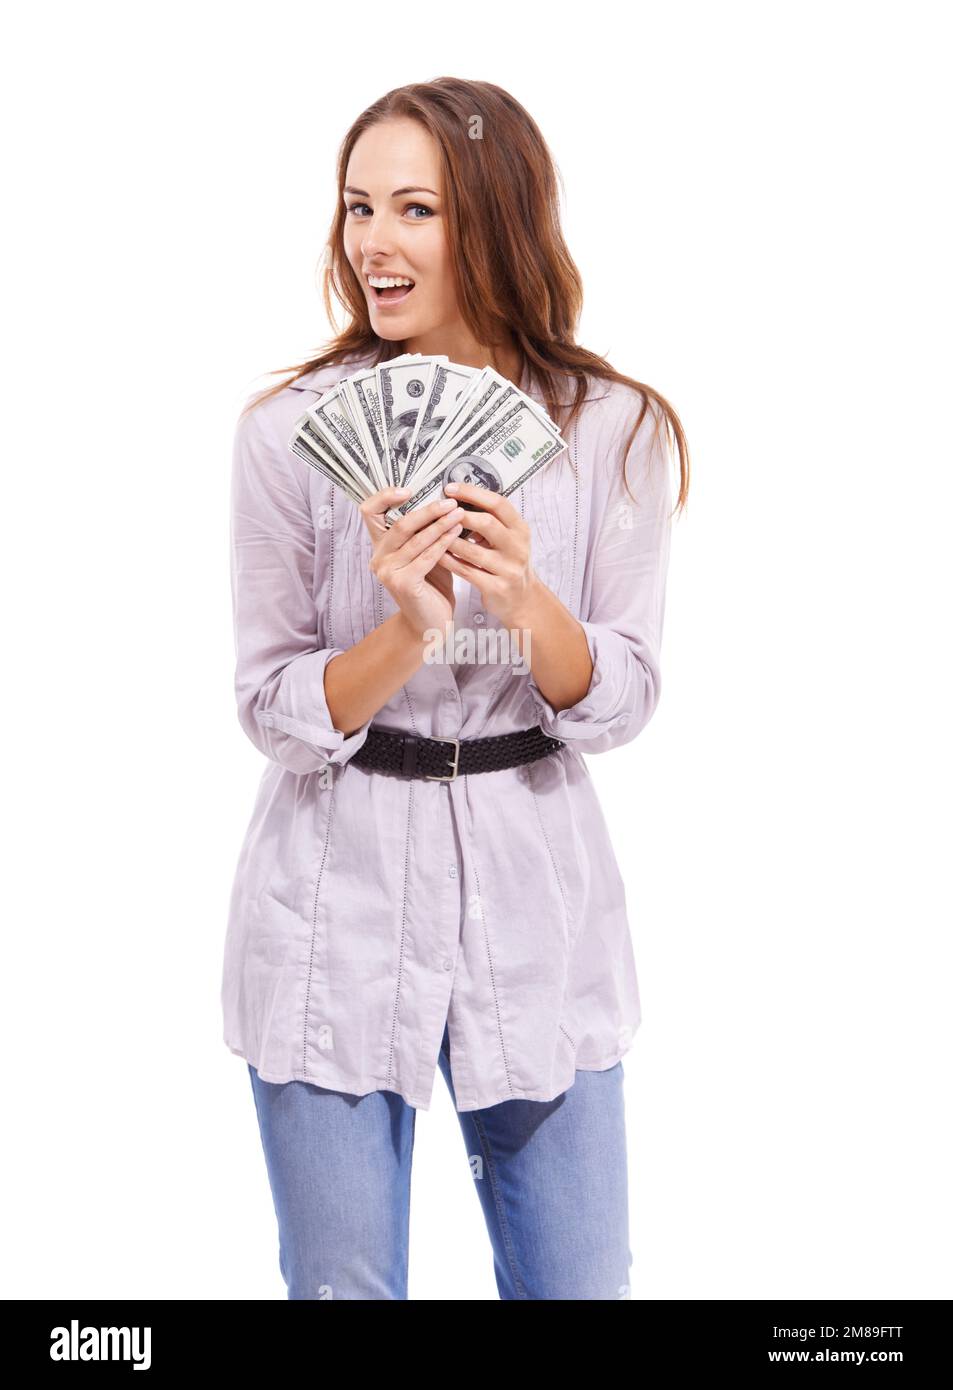 I cant wait to get spending. Casually dressed woman looking excited while holding a wad of cash - isolated on white. Stock Photo